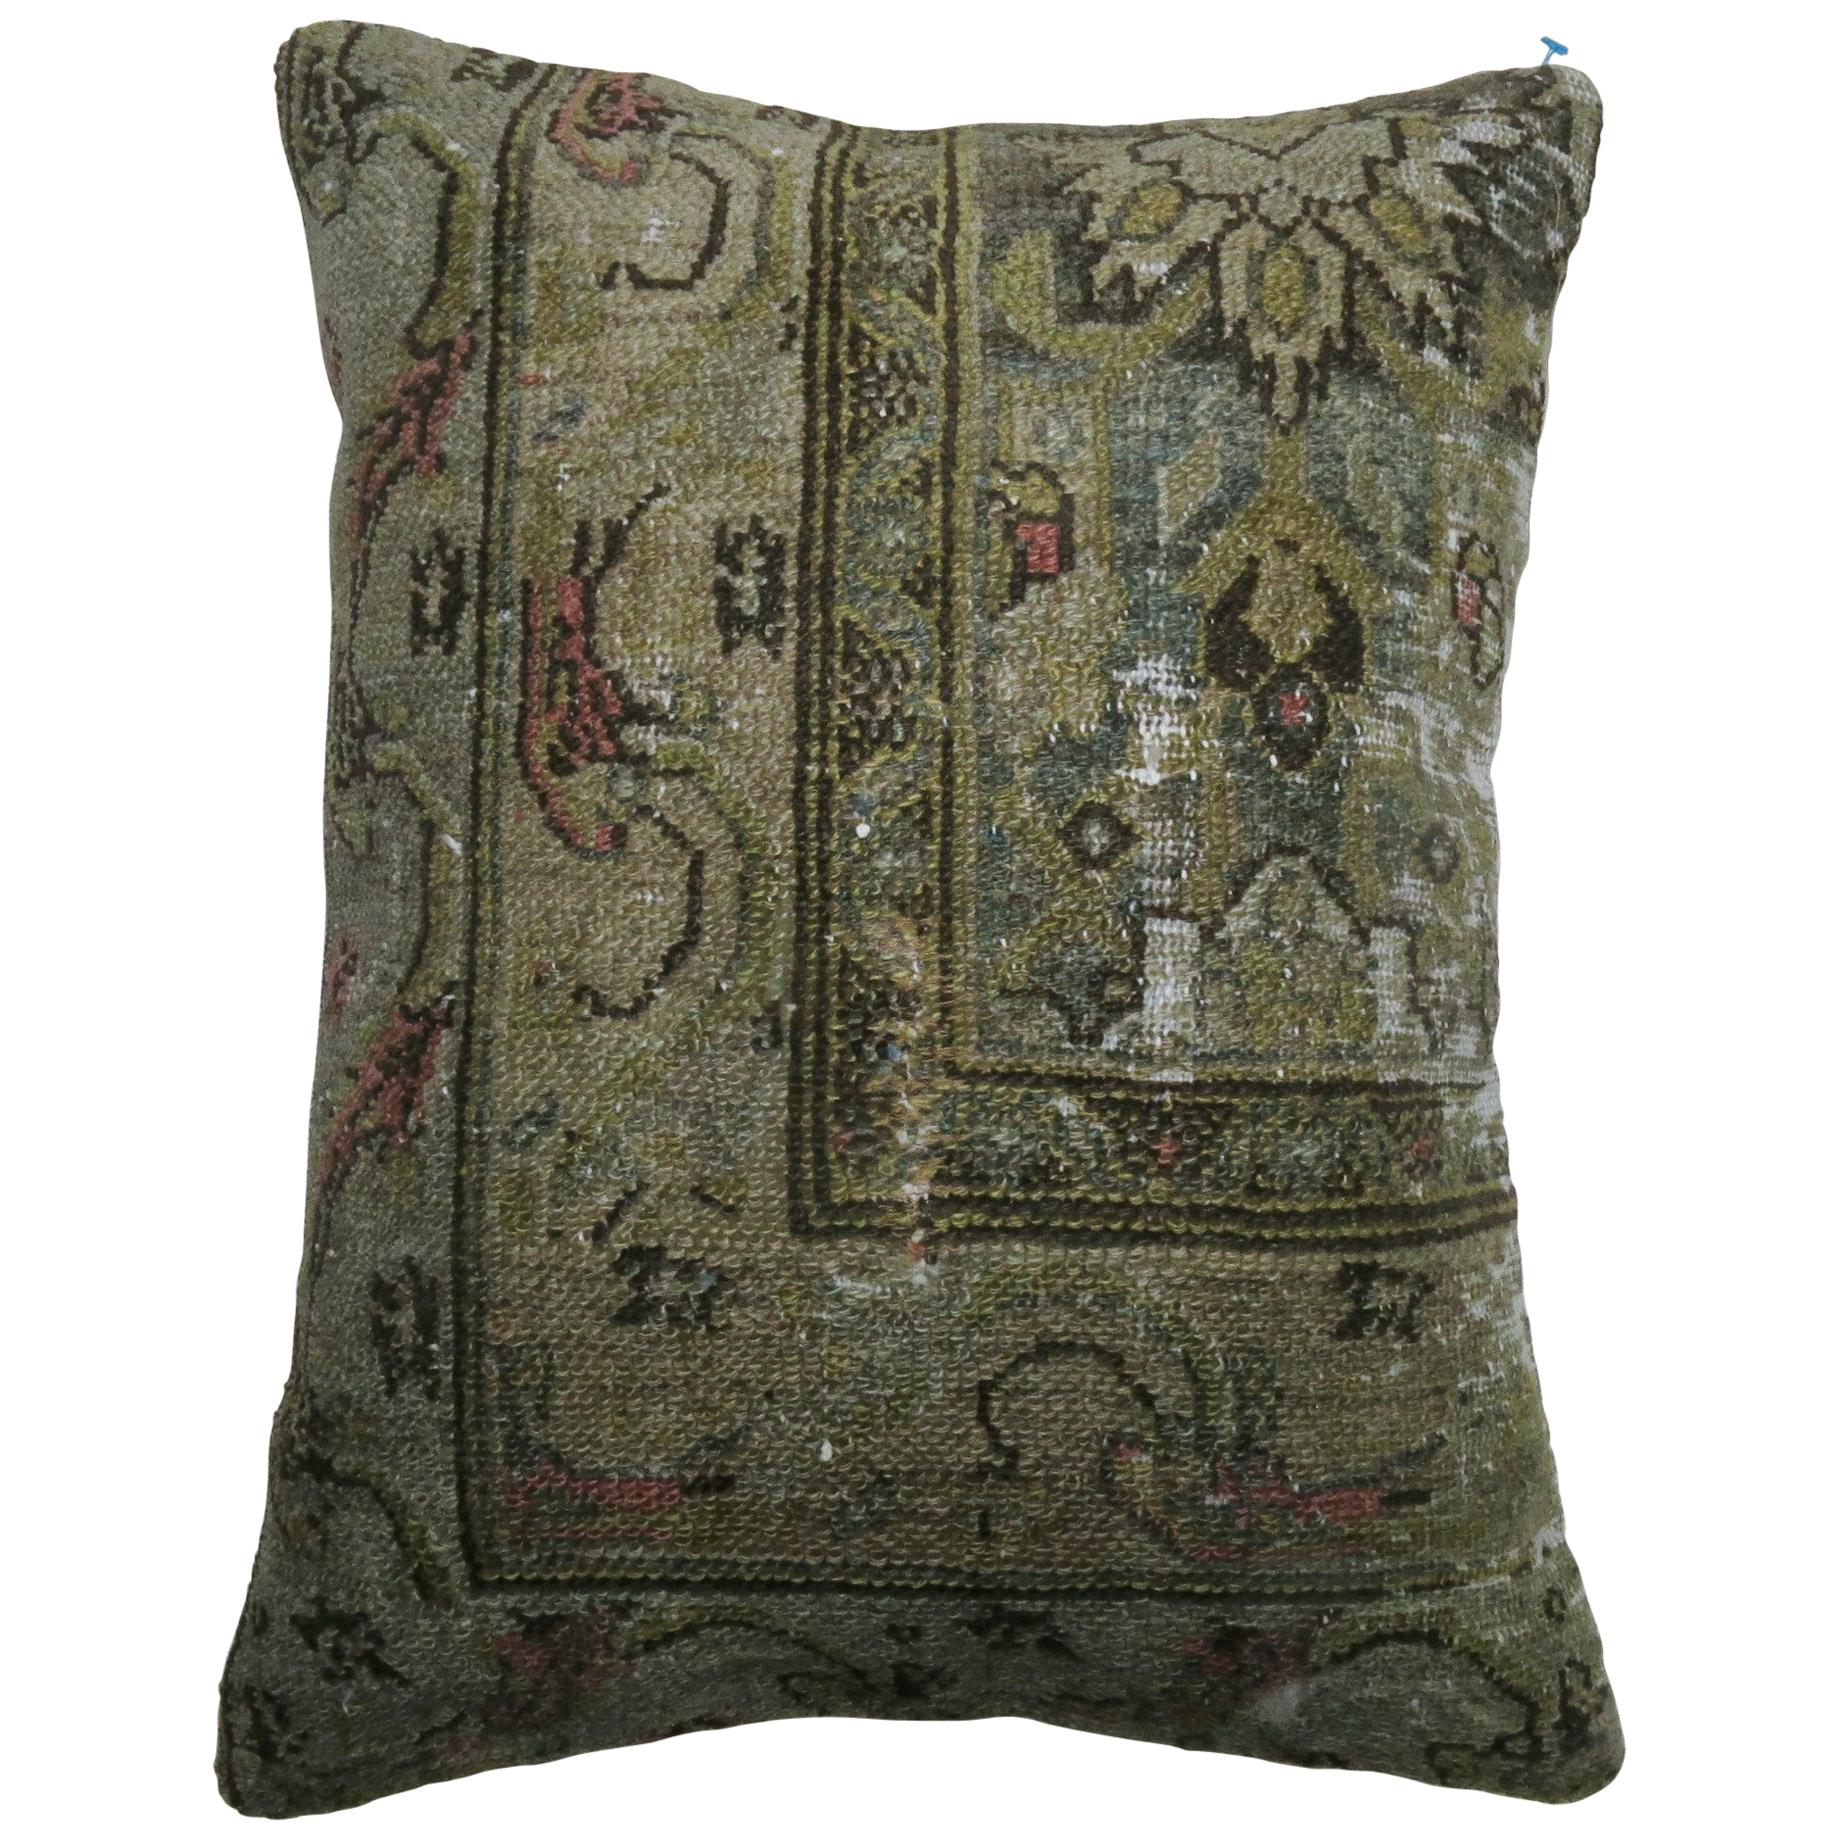 Pillow made from an antique Persian Bibikabad rug.

15'' x 20'